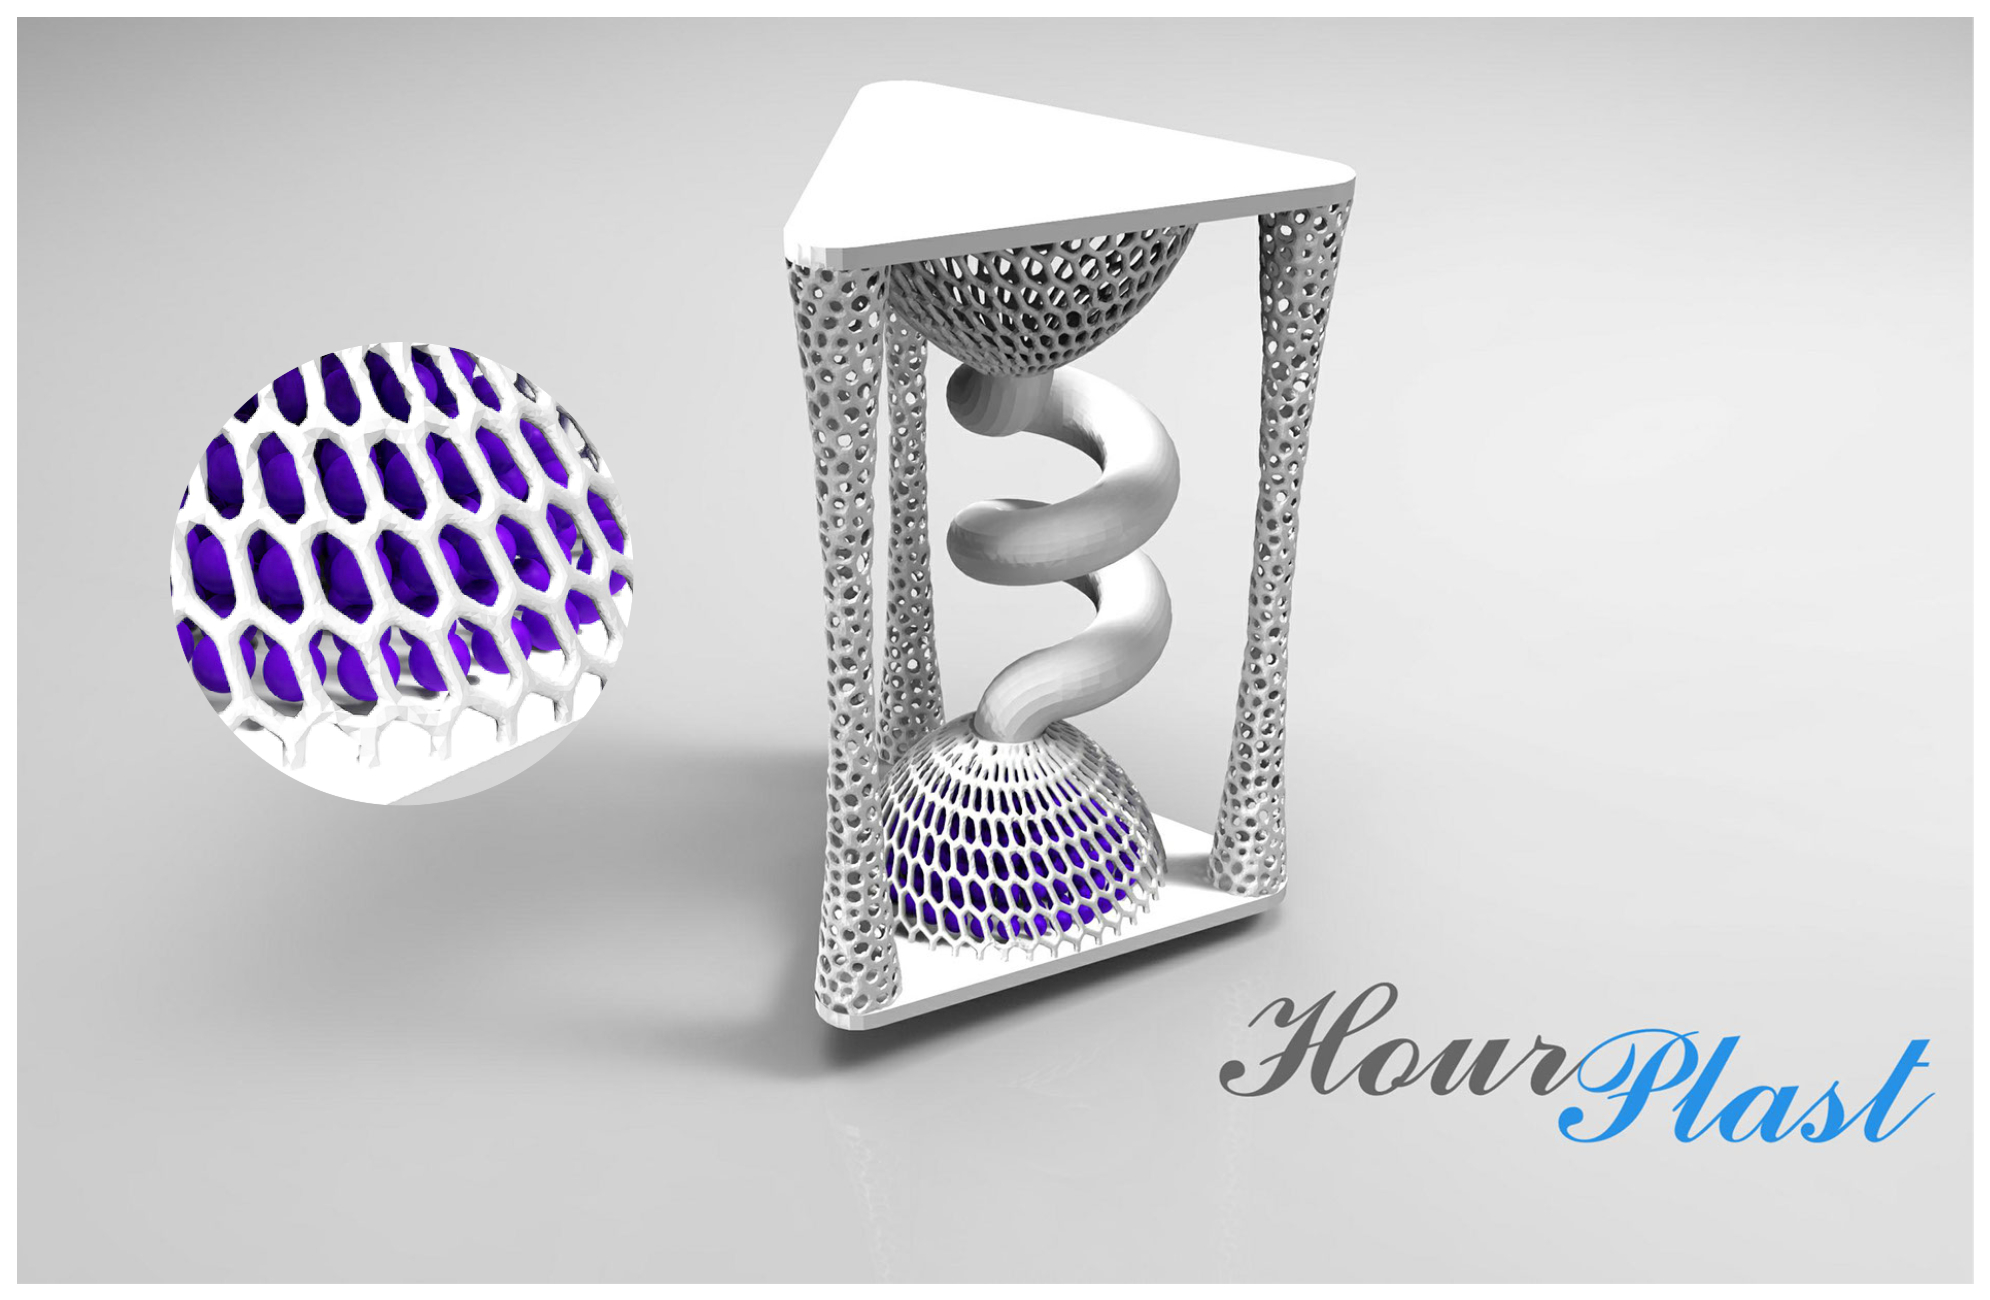 It's Hourplast, decorative design of an hourglass made of 3D printed plastic. The motive was simple phrase "The passage of time", but design wasn't so simple at all. Instead of glass bulbs, it has two net designed half-spheres, connected with a spiral tube. In addition to its decorativeness, Hourplast is also functional. Little balls printed inside those half-spheres can "flow" through the tube, up to the other seethrough sphere, measuring "The passage of time" as was the idea.